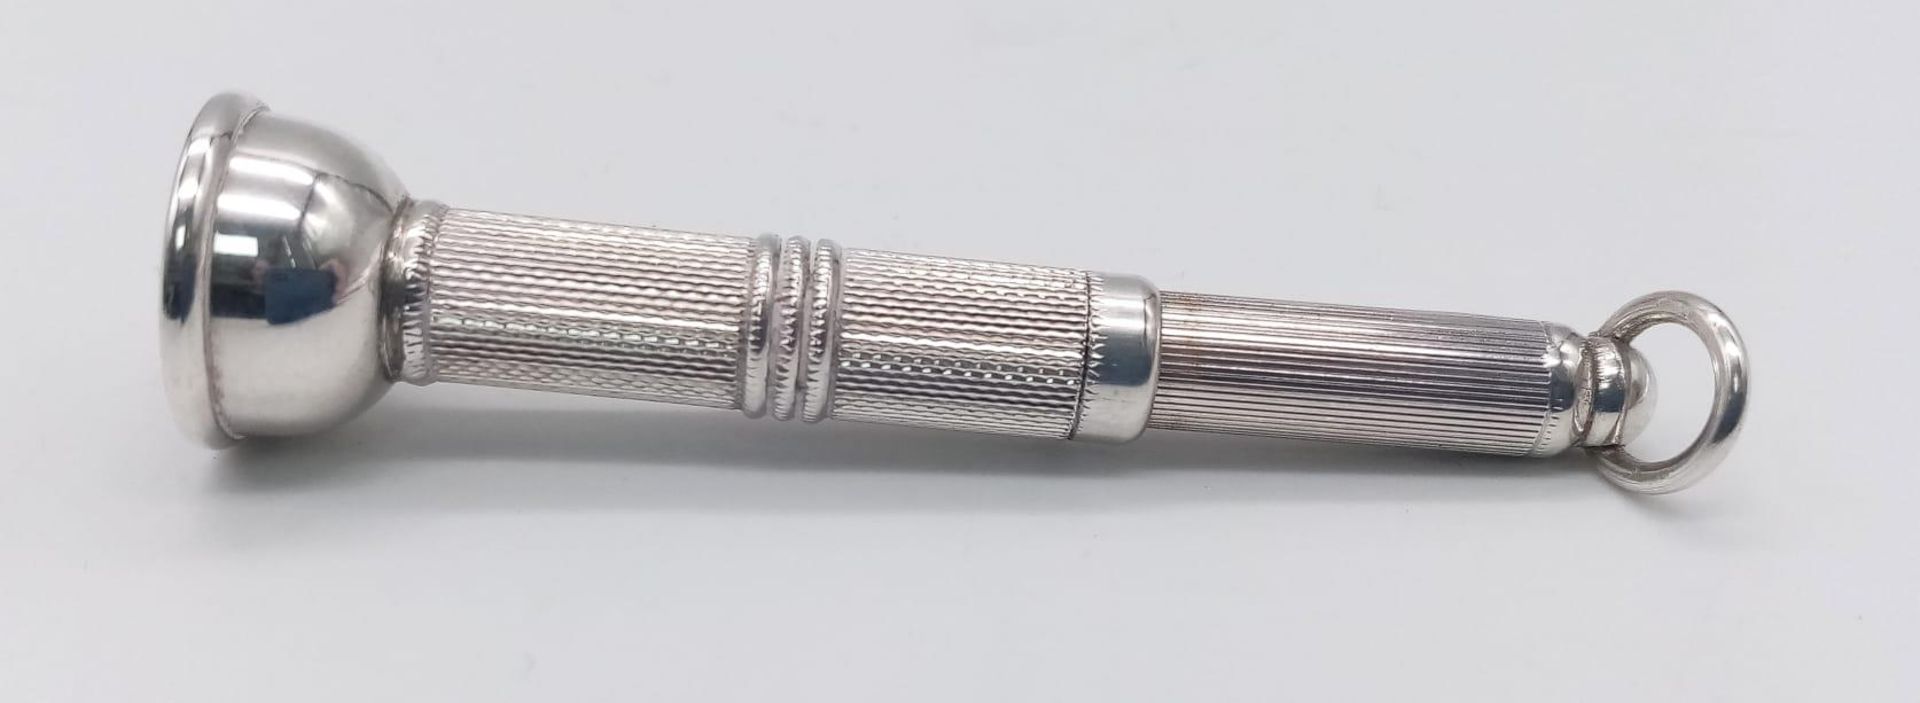 1980, Birmingham Sterling Silver, Cigar Hold Punch. Simply hold a cigar up to the end of the punch